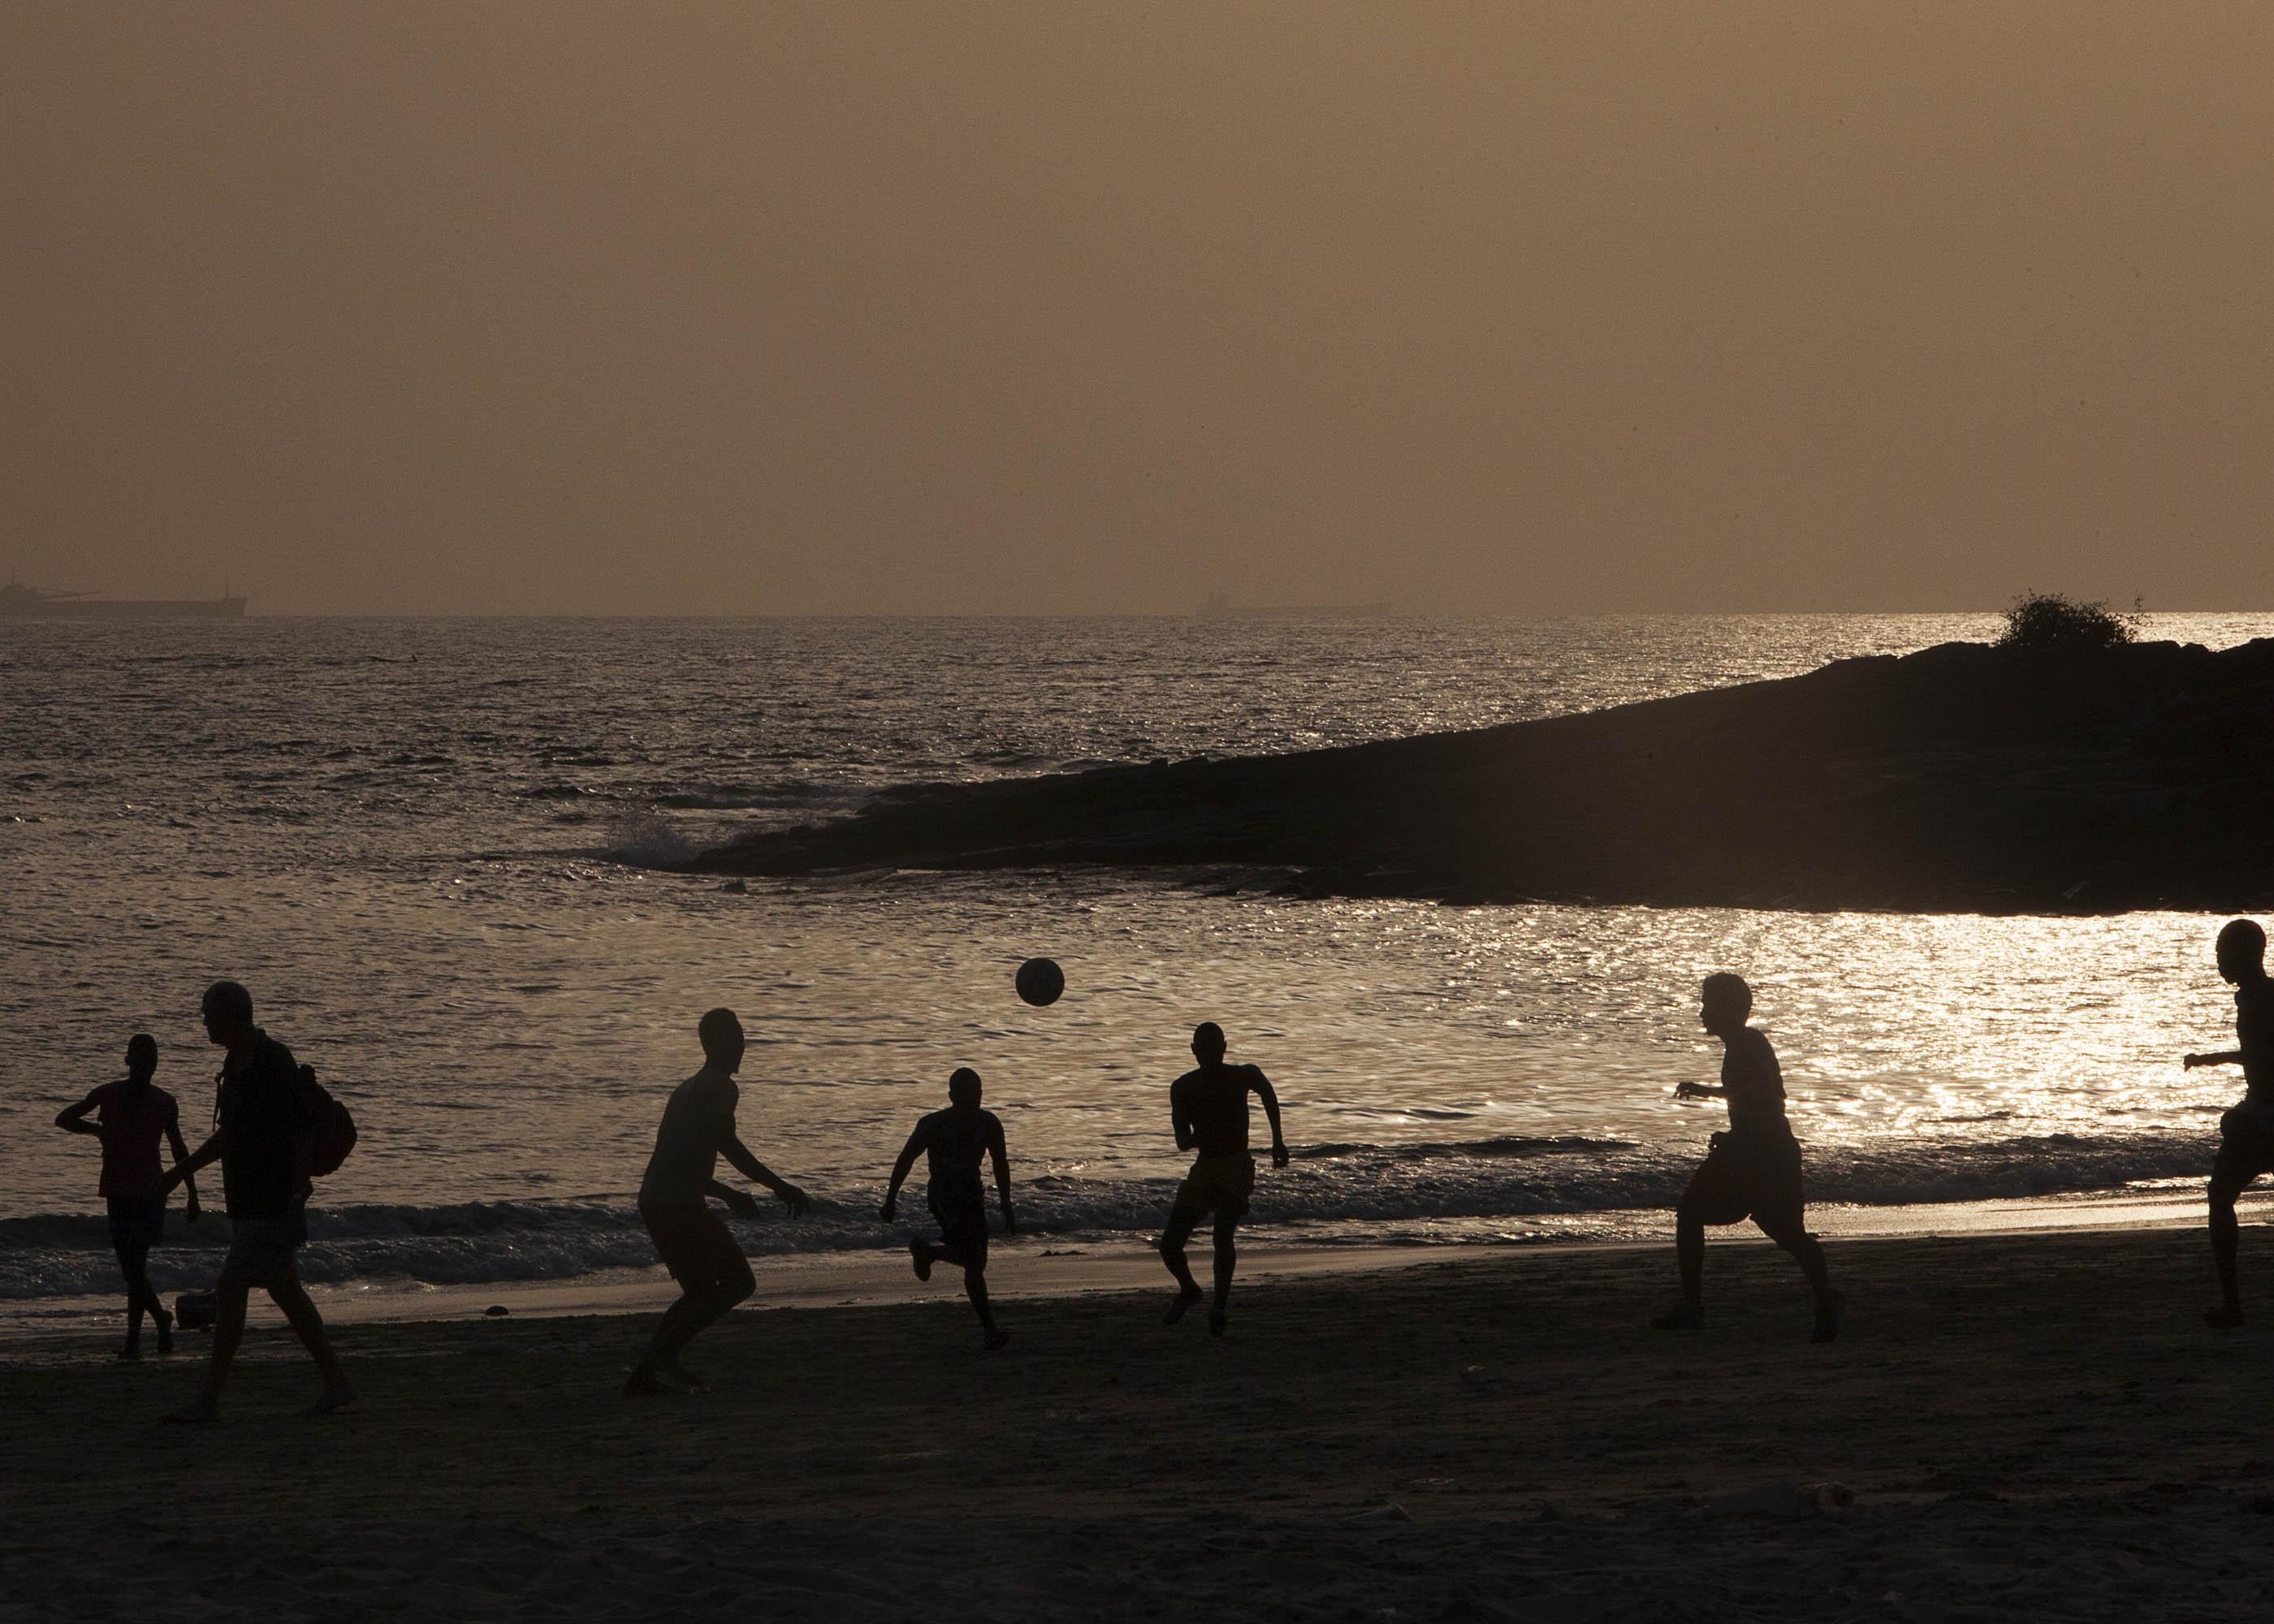 AFCON series: Football playing at the beach in Freetown, Sierra Leone. Credit: Andrew Eseibo / Rele Gallery, Nigeria